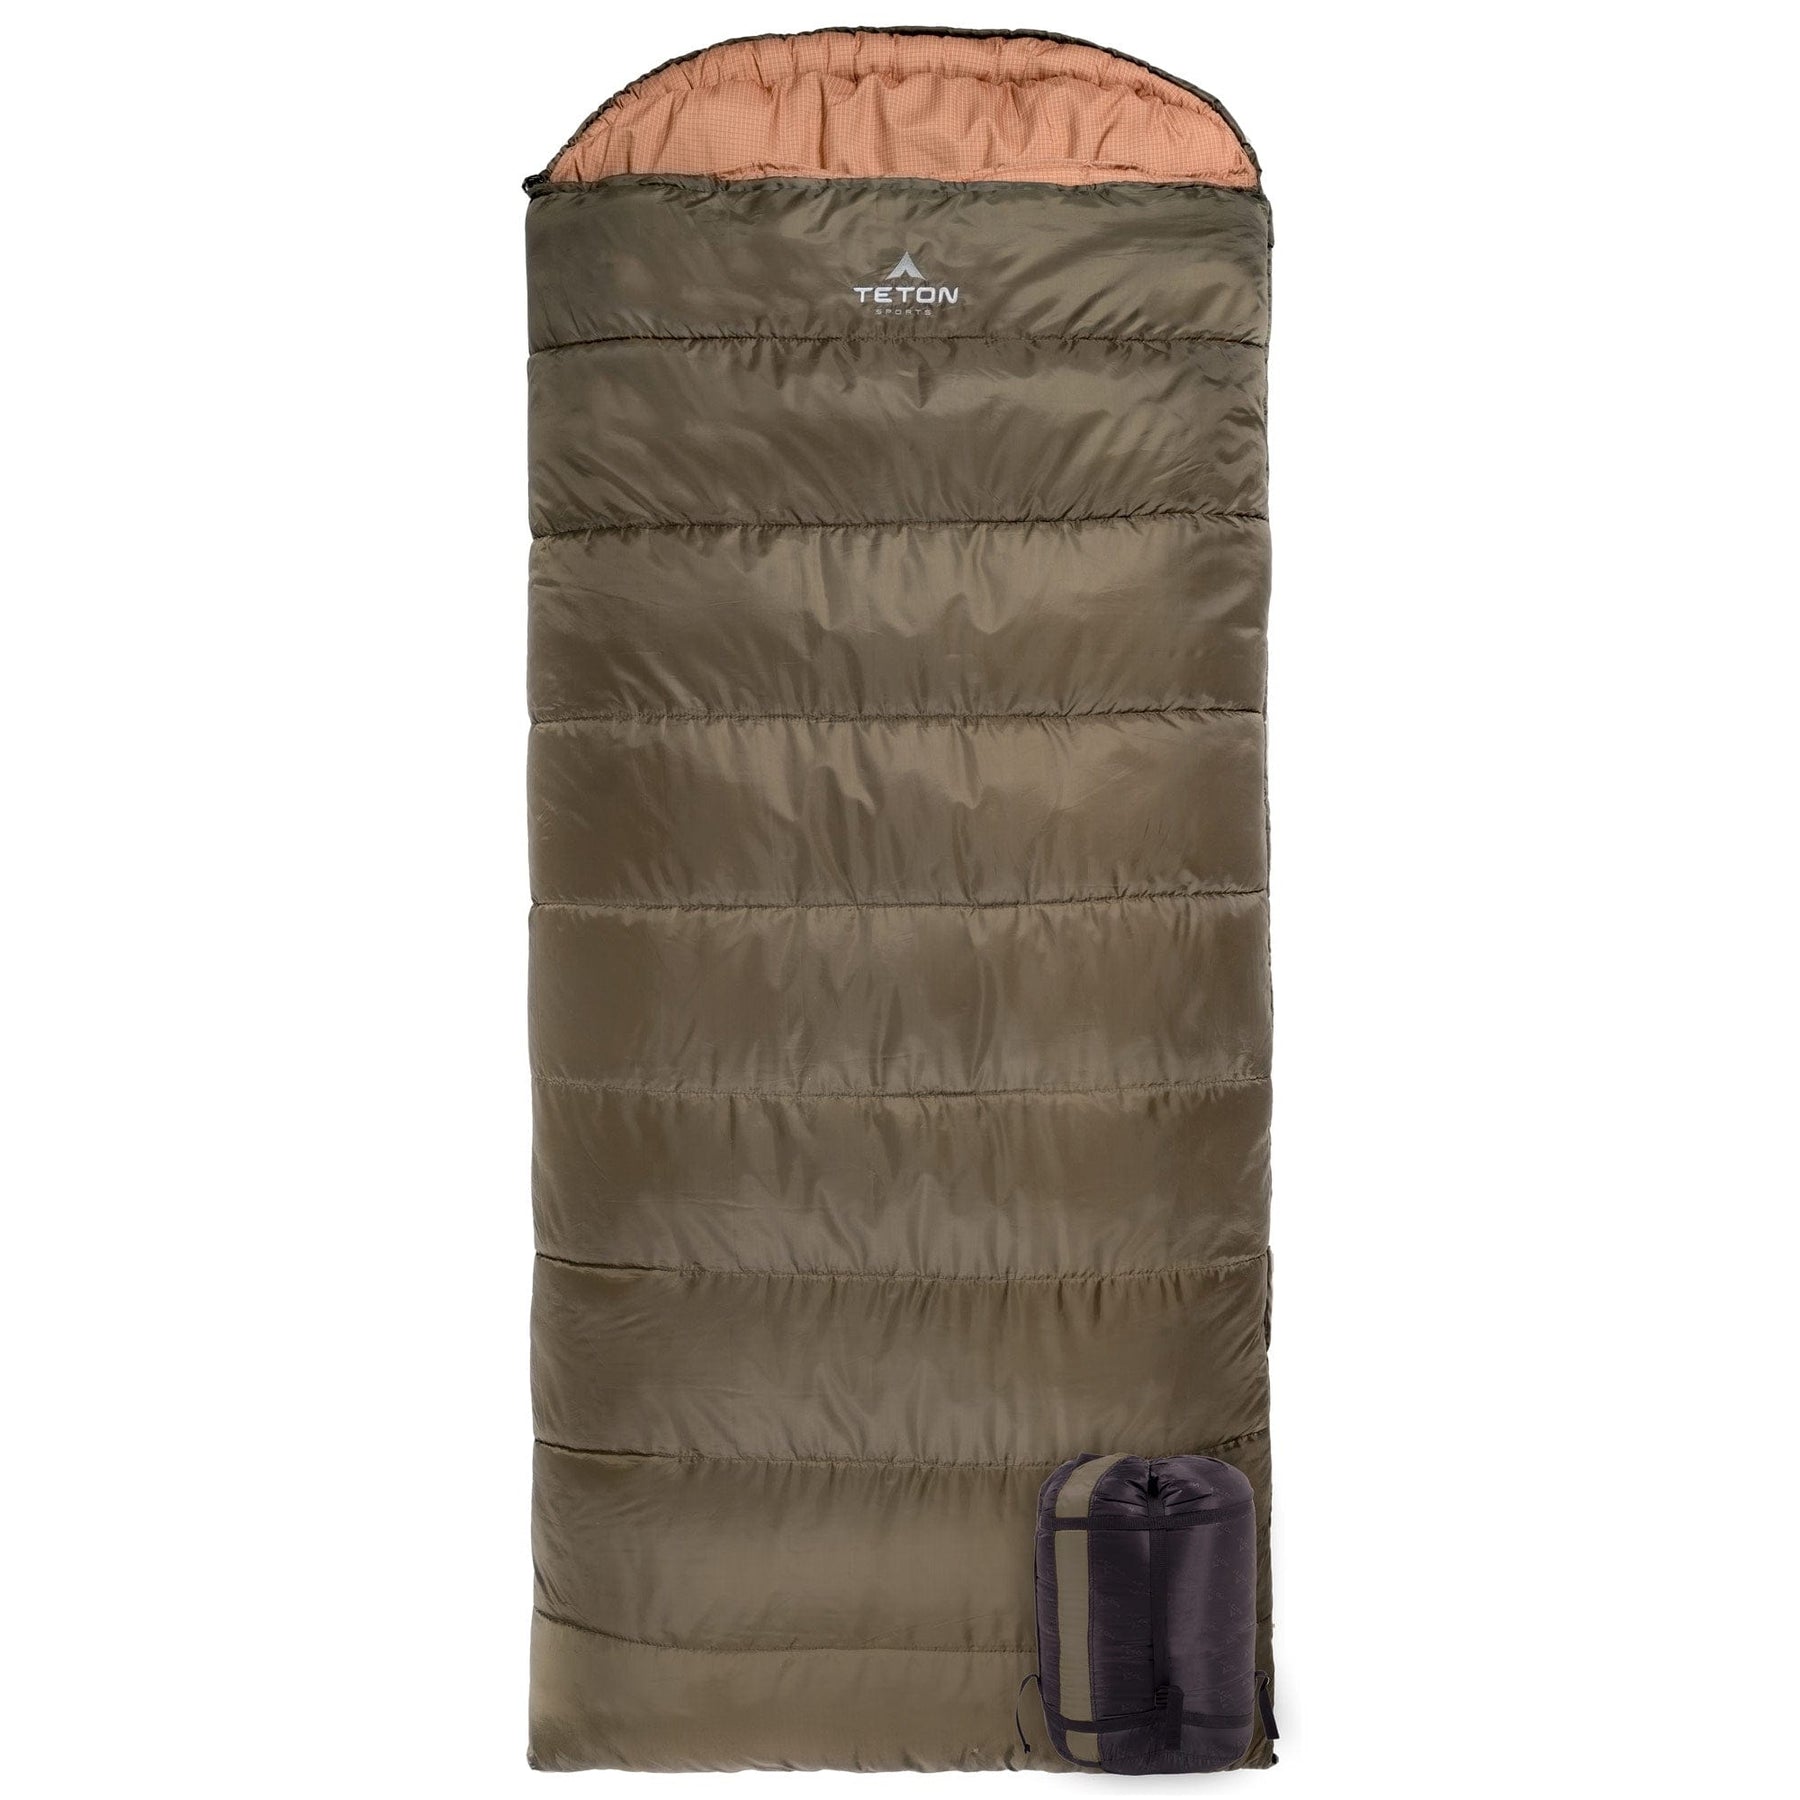 Best Sleeping Bags for Kids - Tales of a Mountain Mama